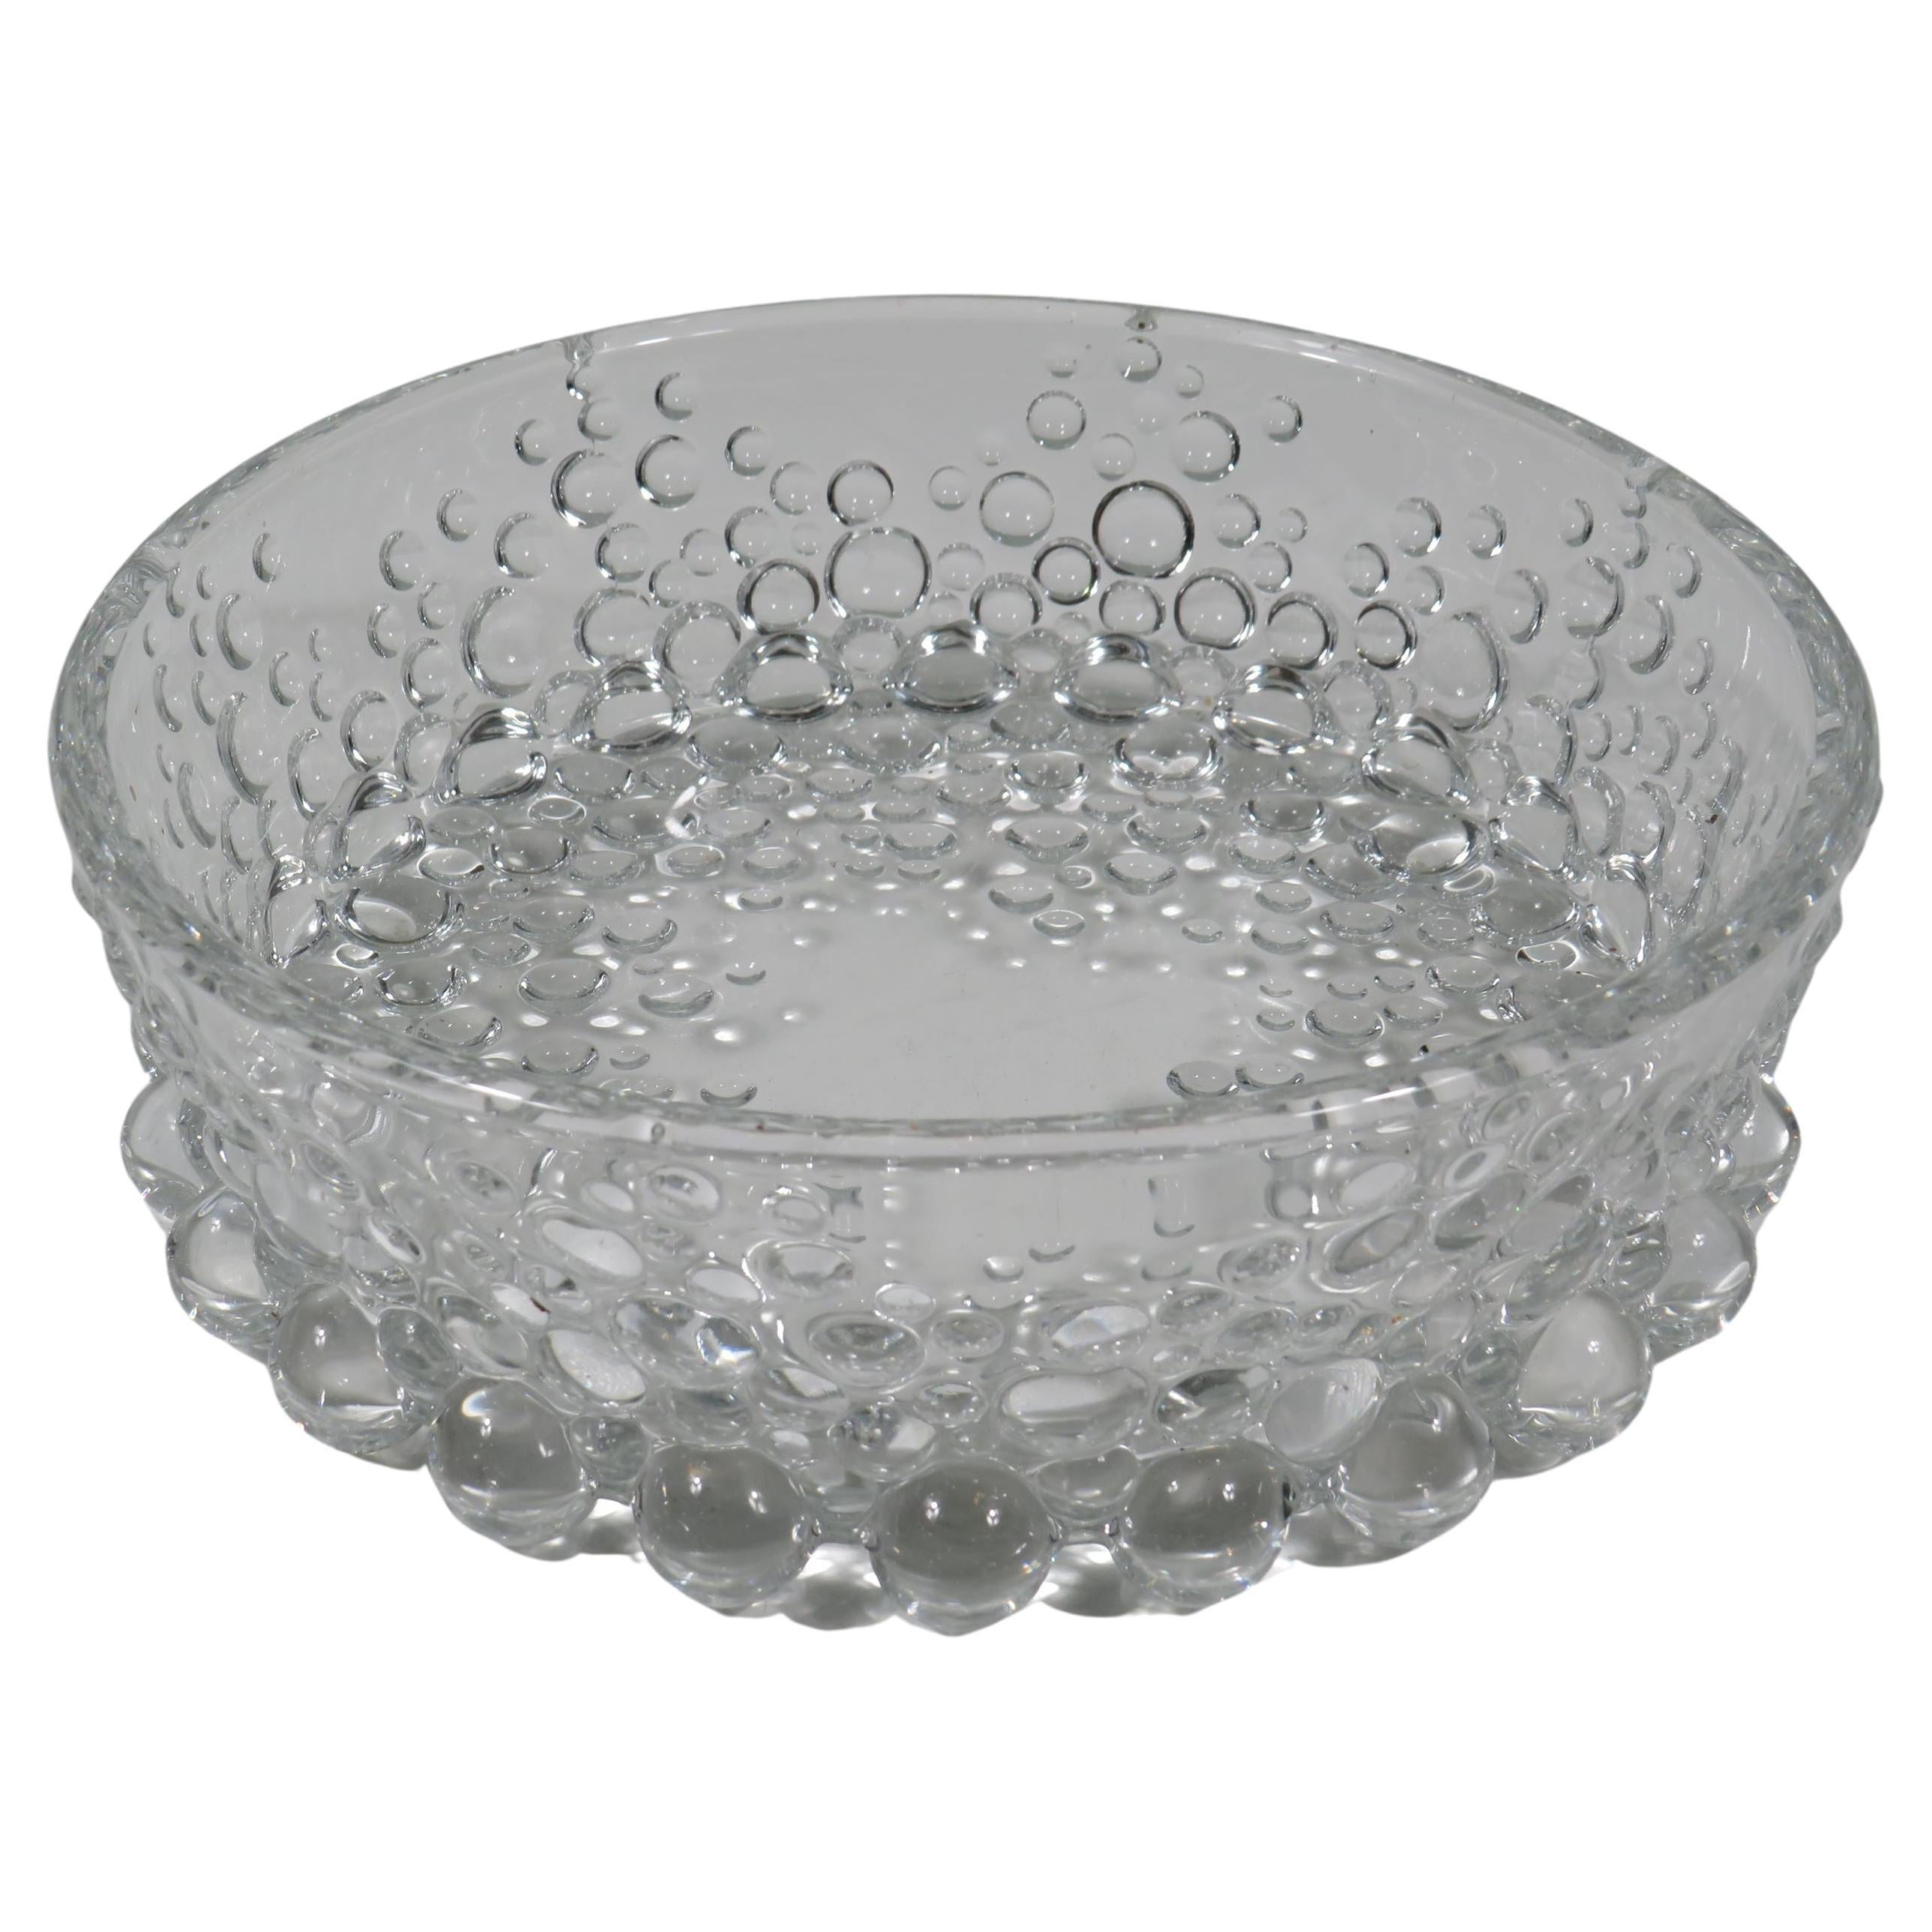 Mid century glass bowl by Walther glass, Germany 1970